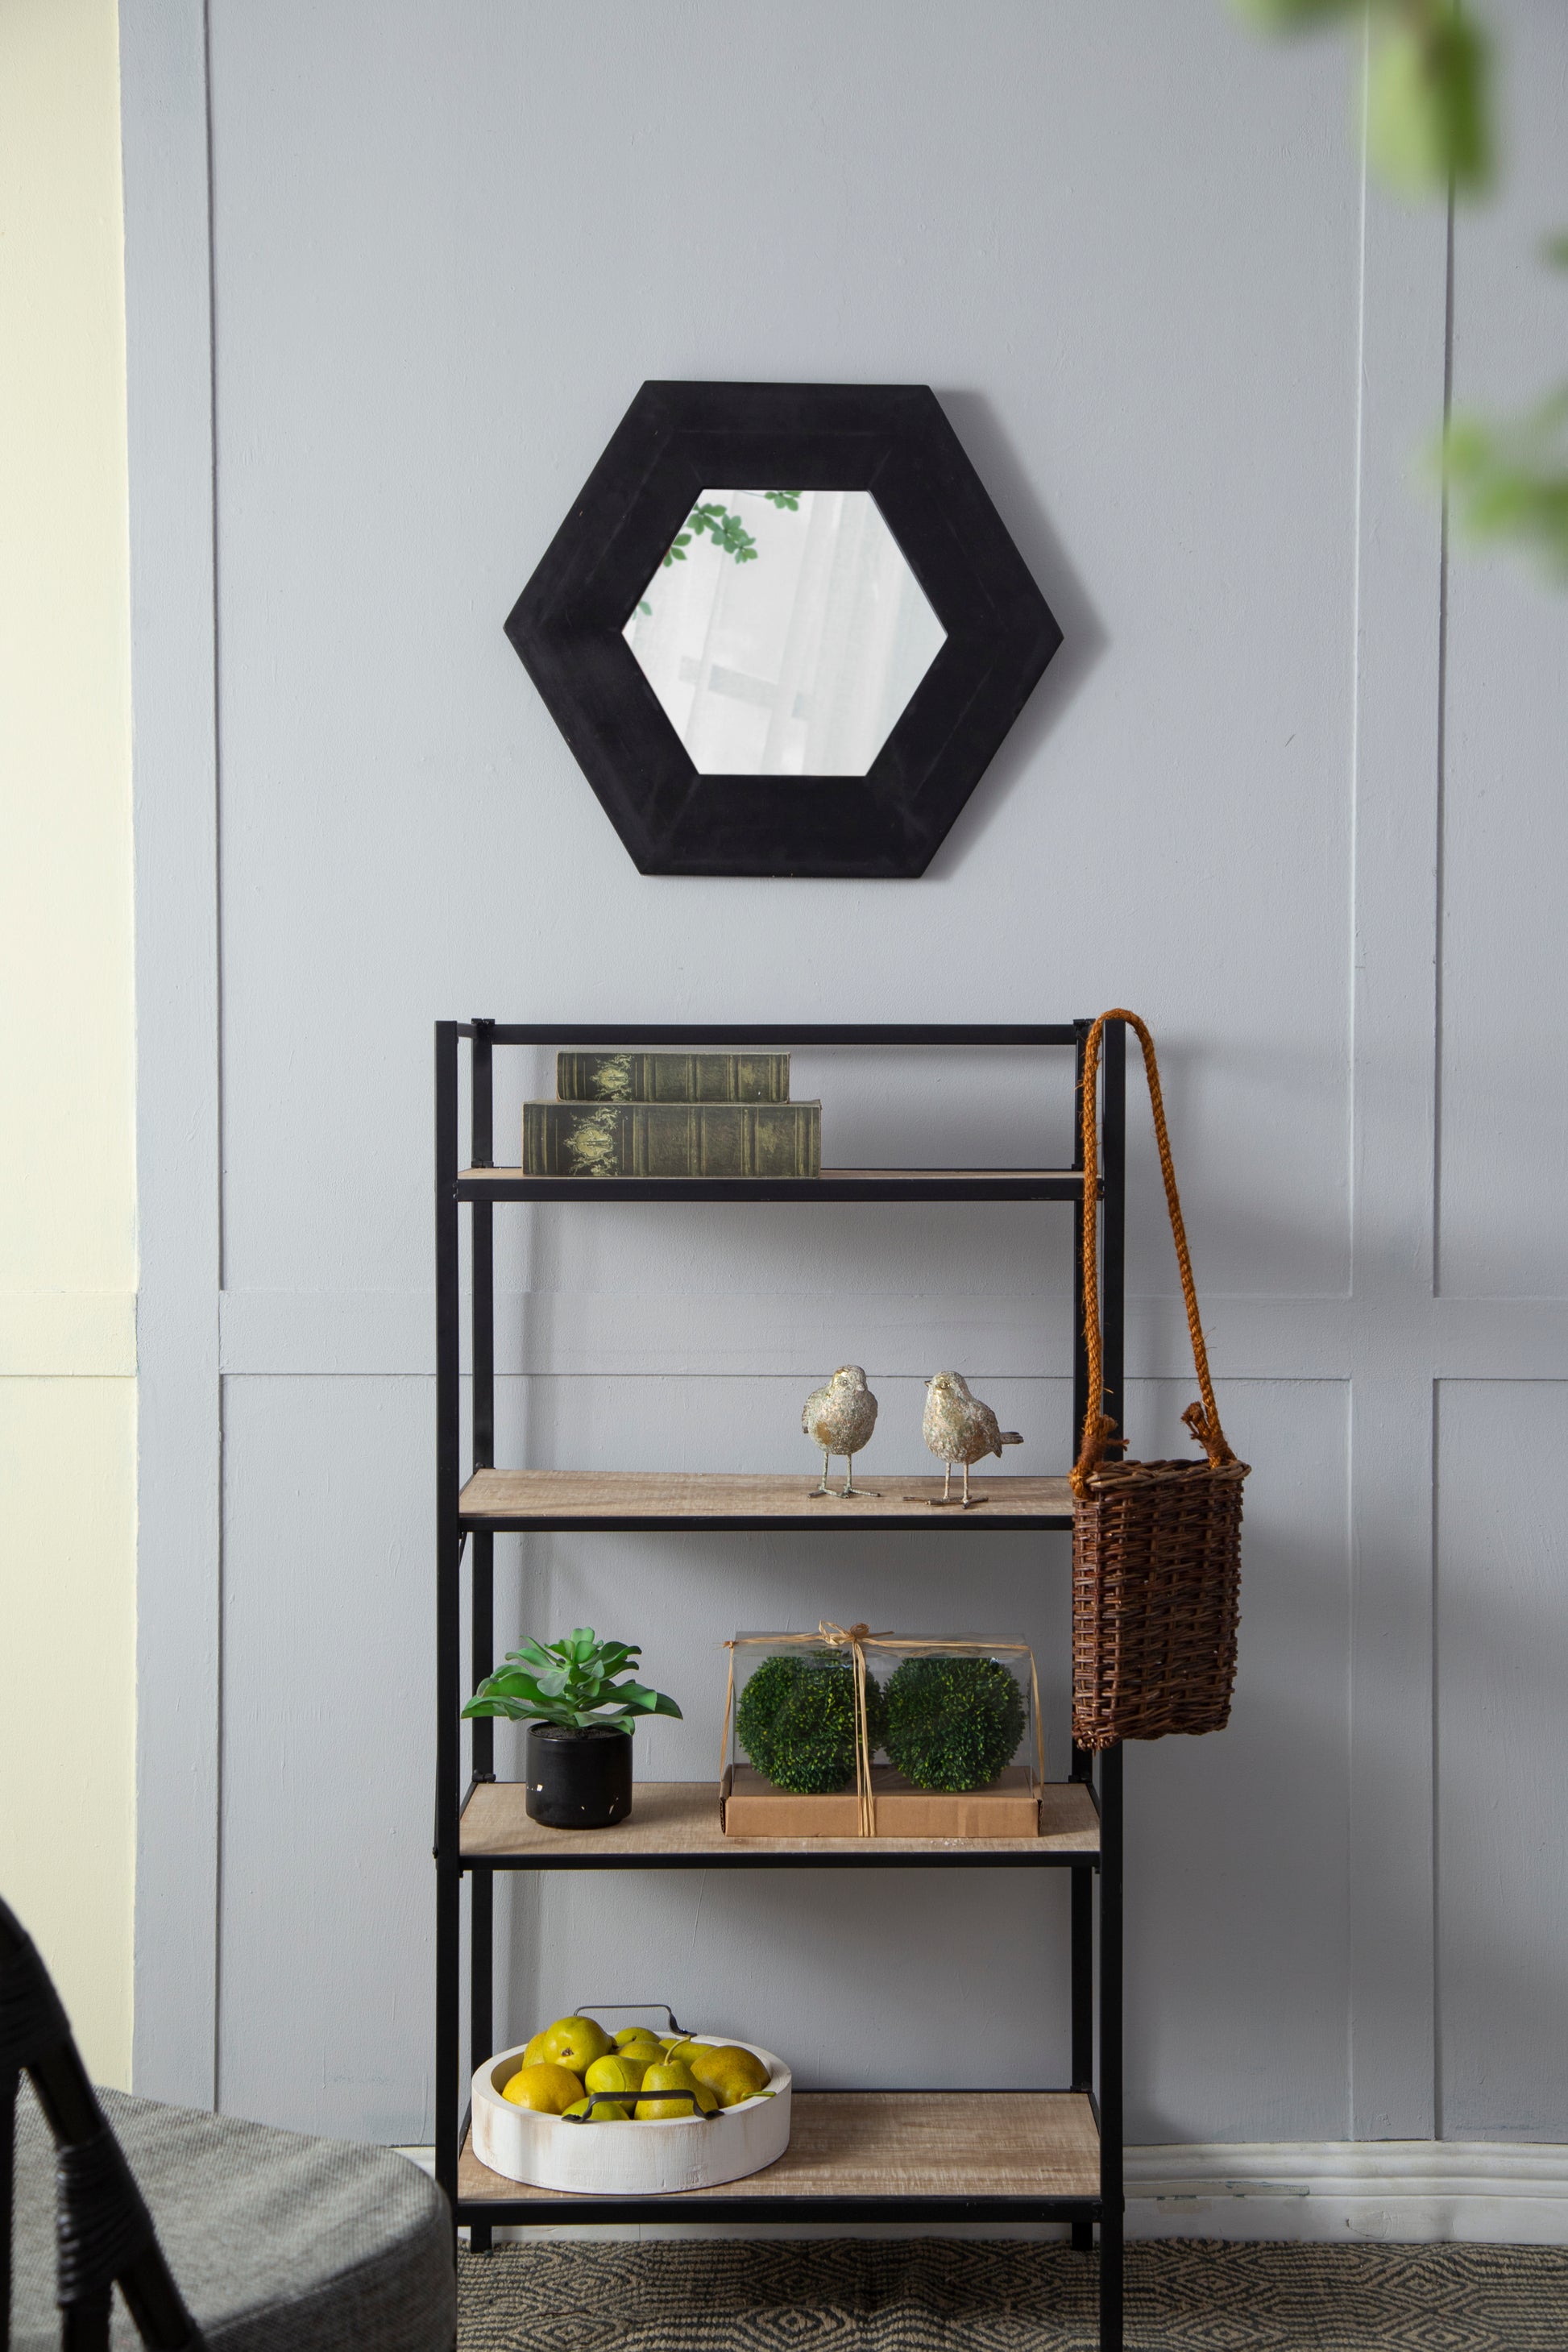 18.5" x 18.5" Hexagon Mirror with Solid Wood Frame black-wood+glass